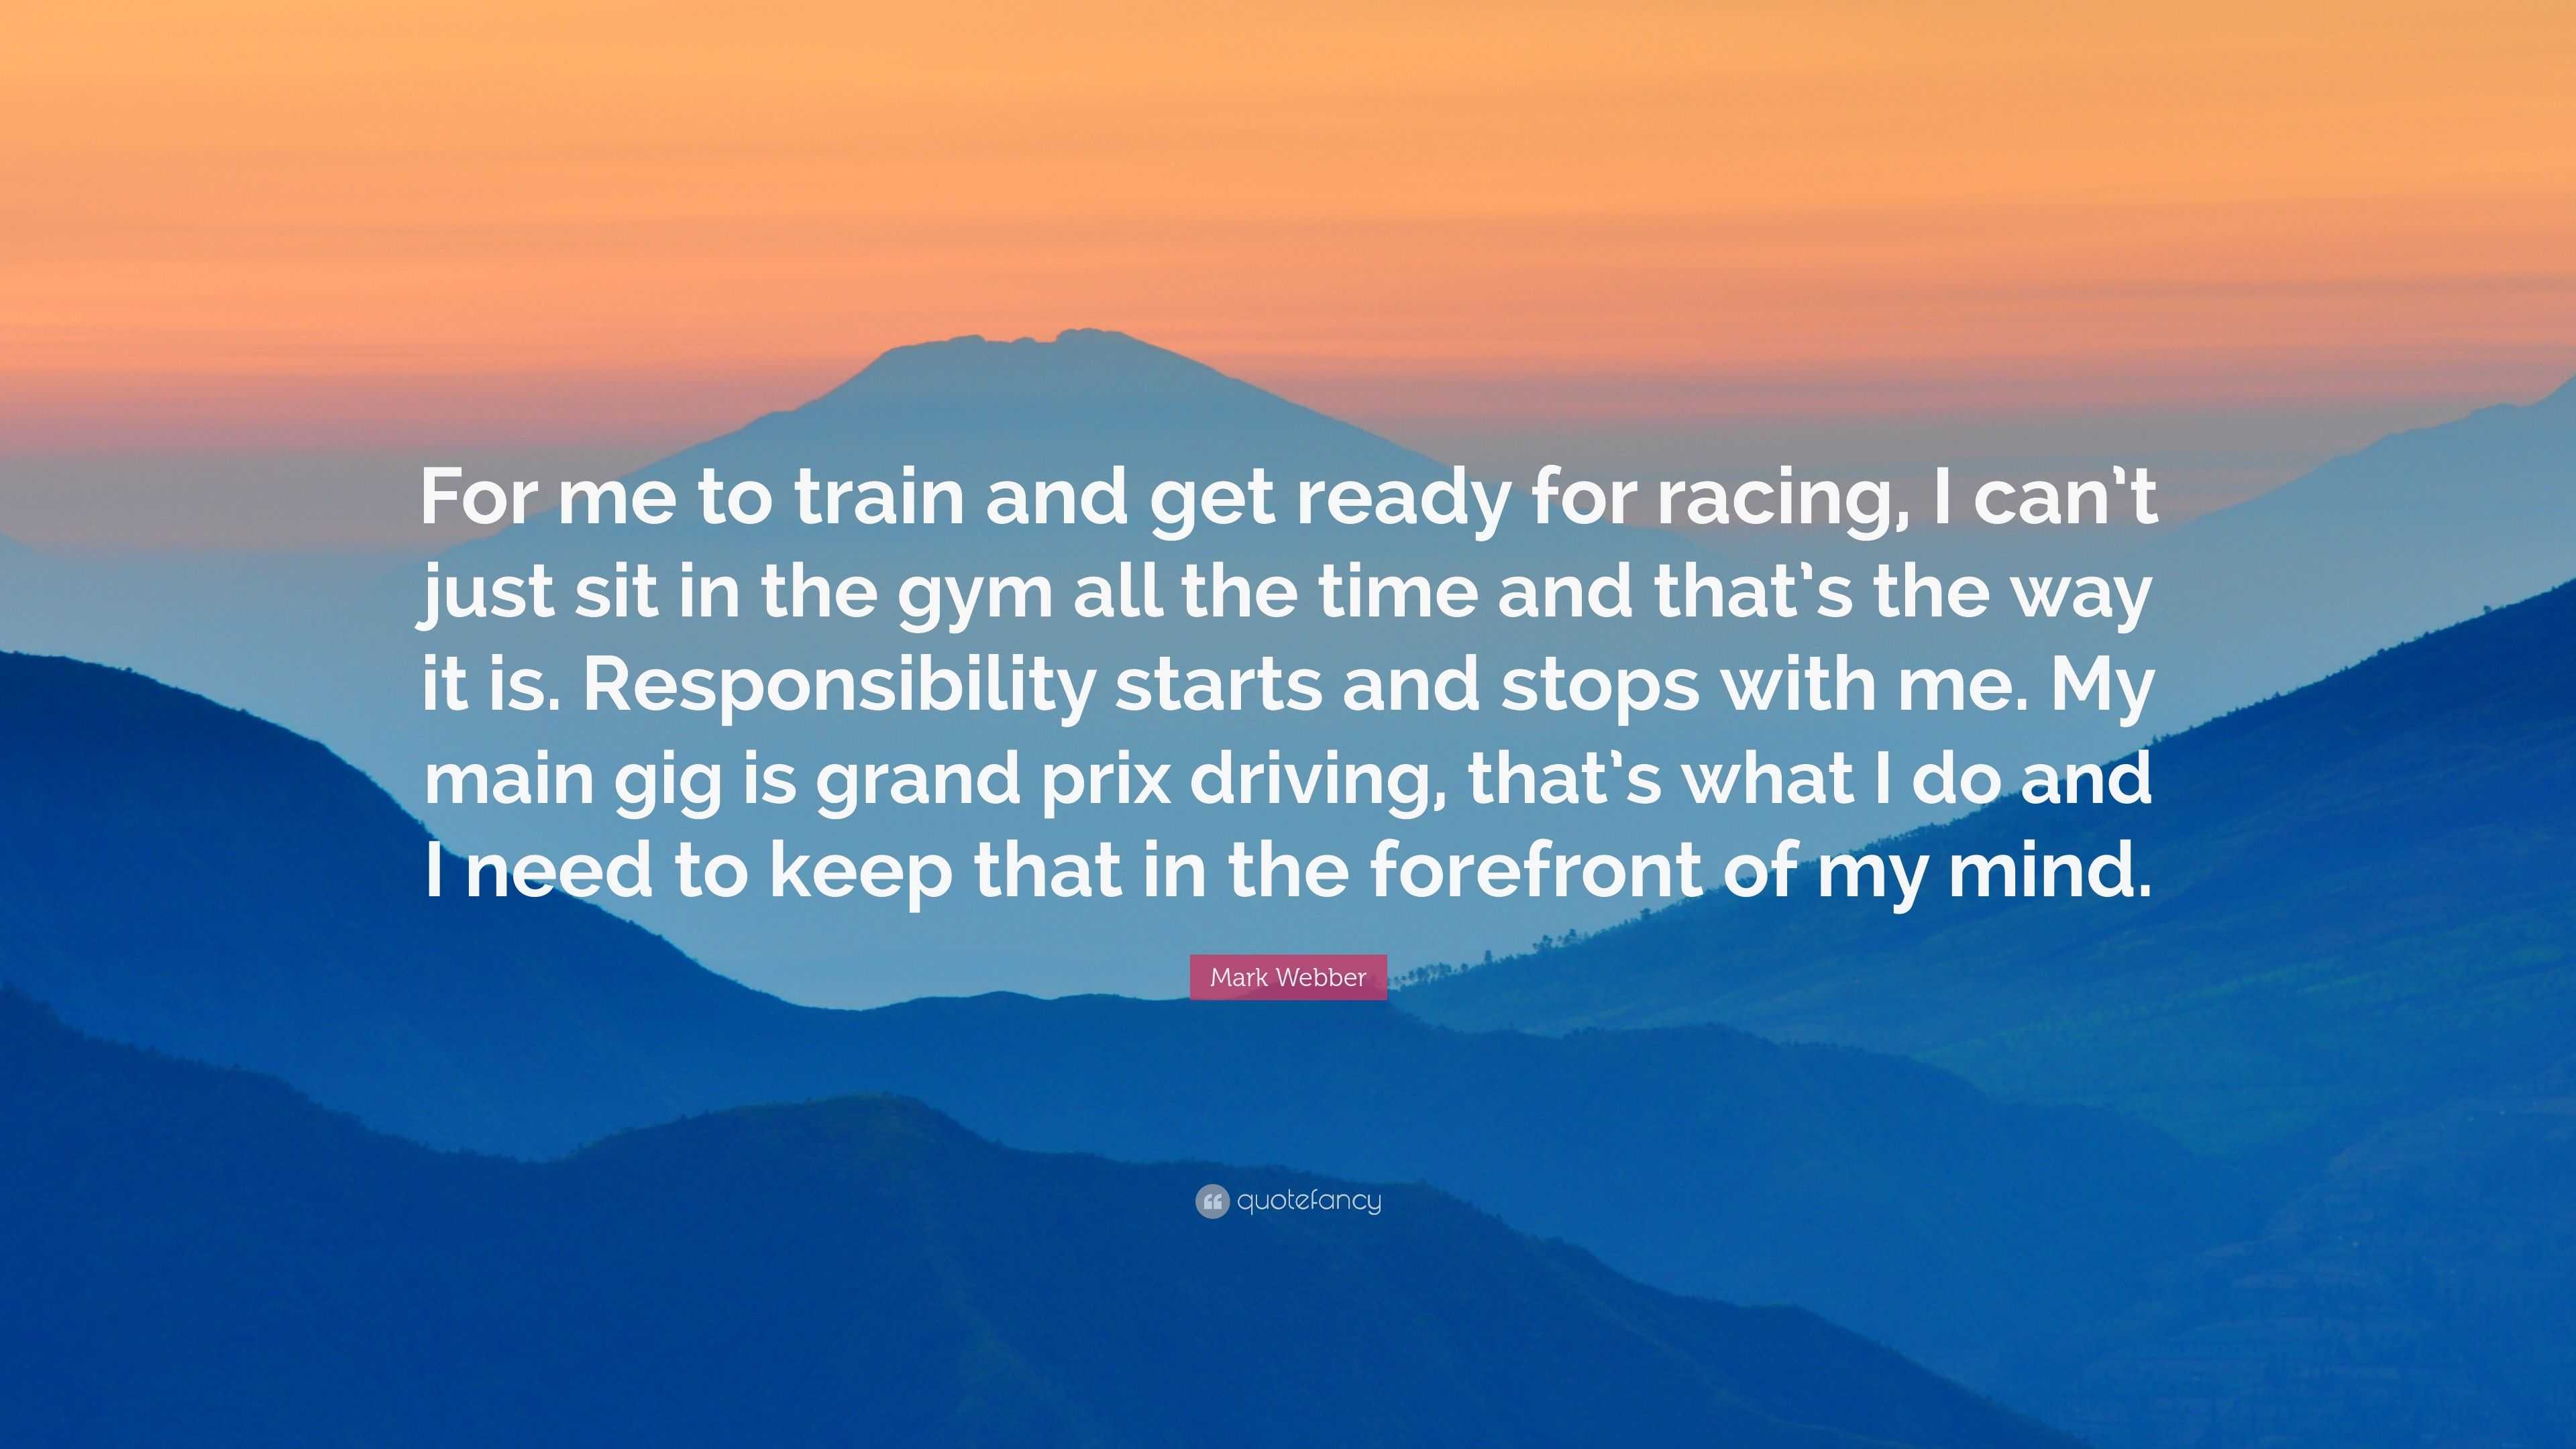 Mark Webber Quote For Me To Train And Get Ready For Racing I Can T Just Sit In The Gym All The Time And That S The Way It Is Responsibil